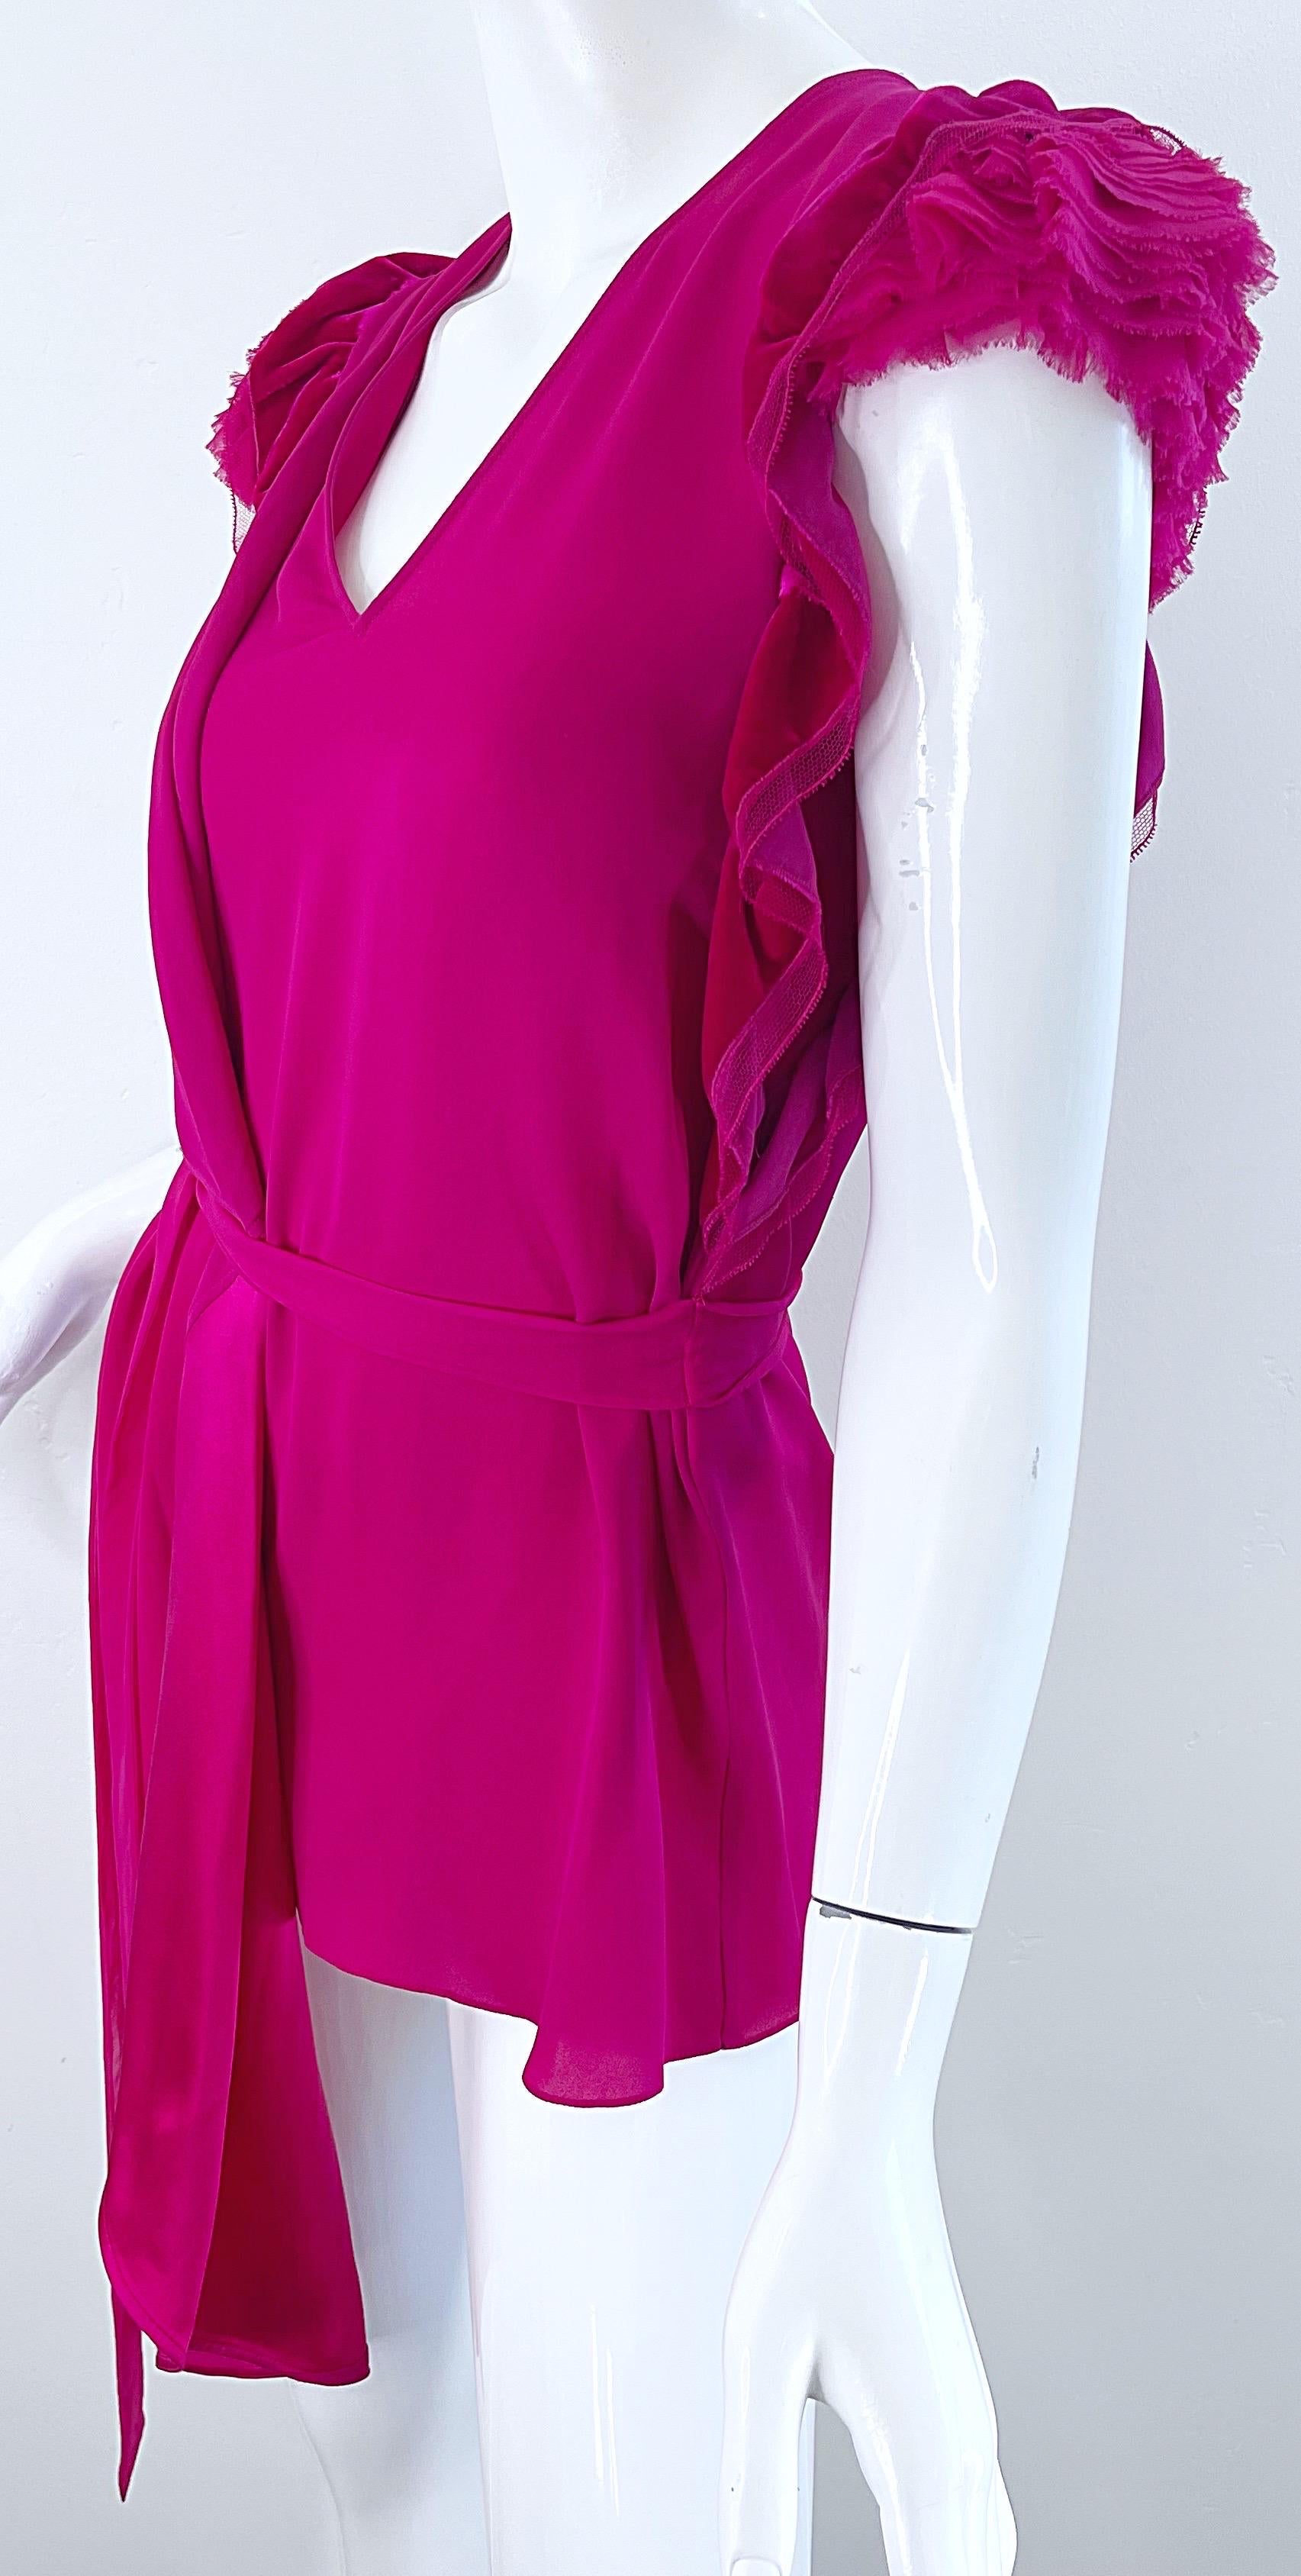 NWT Givenchy Spring 2020 Size 34 / 2 - 4 Hot Pink Fuchsia Silk Belted Blouse Top For Sale 9